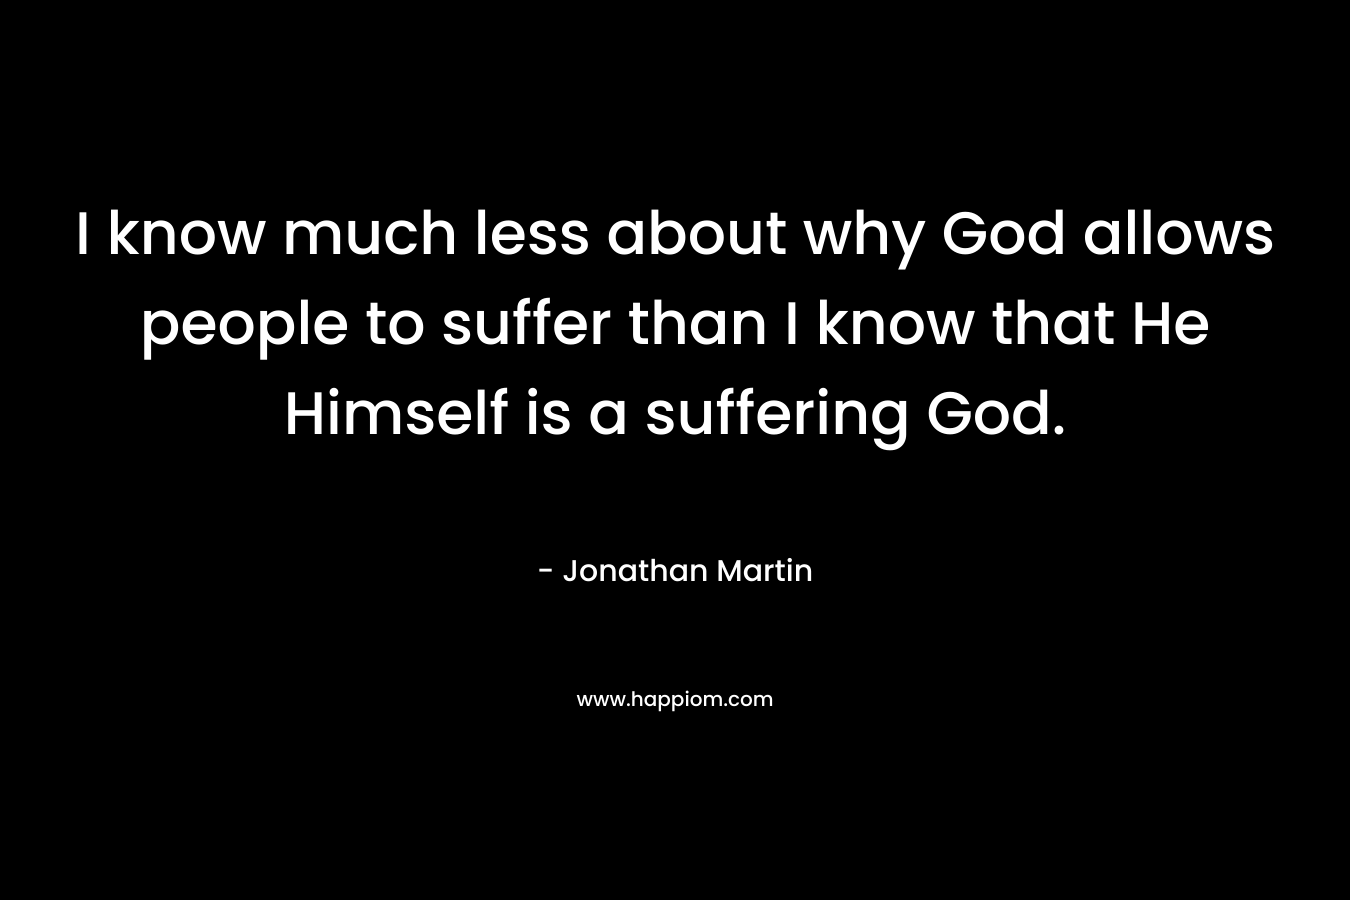 I know much less about why God allows people to suffer than I know that He Himself is a suffering God.